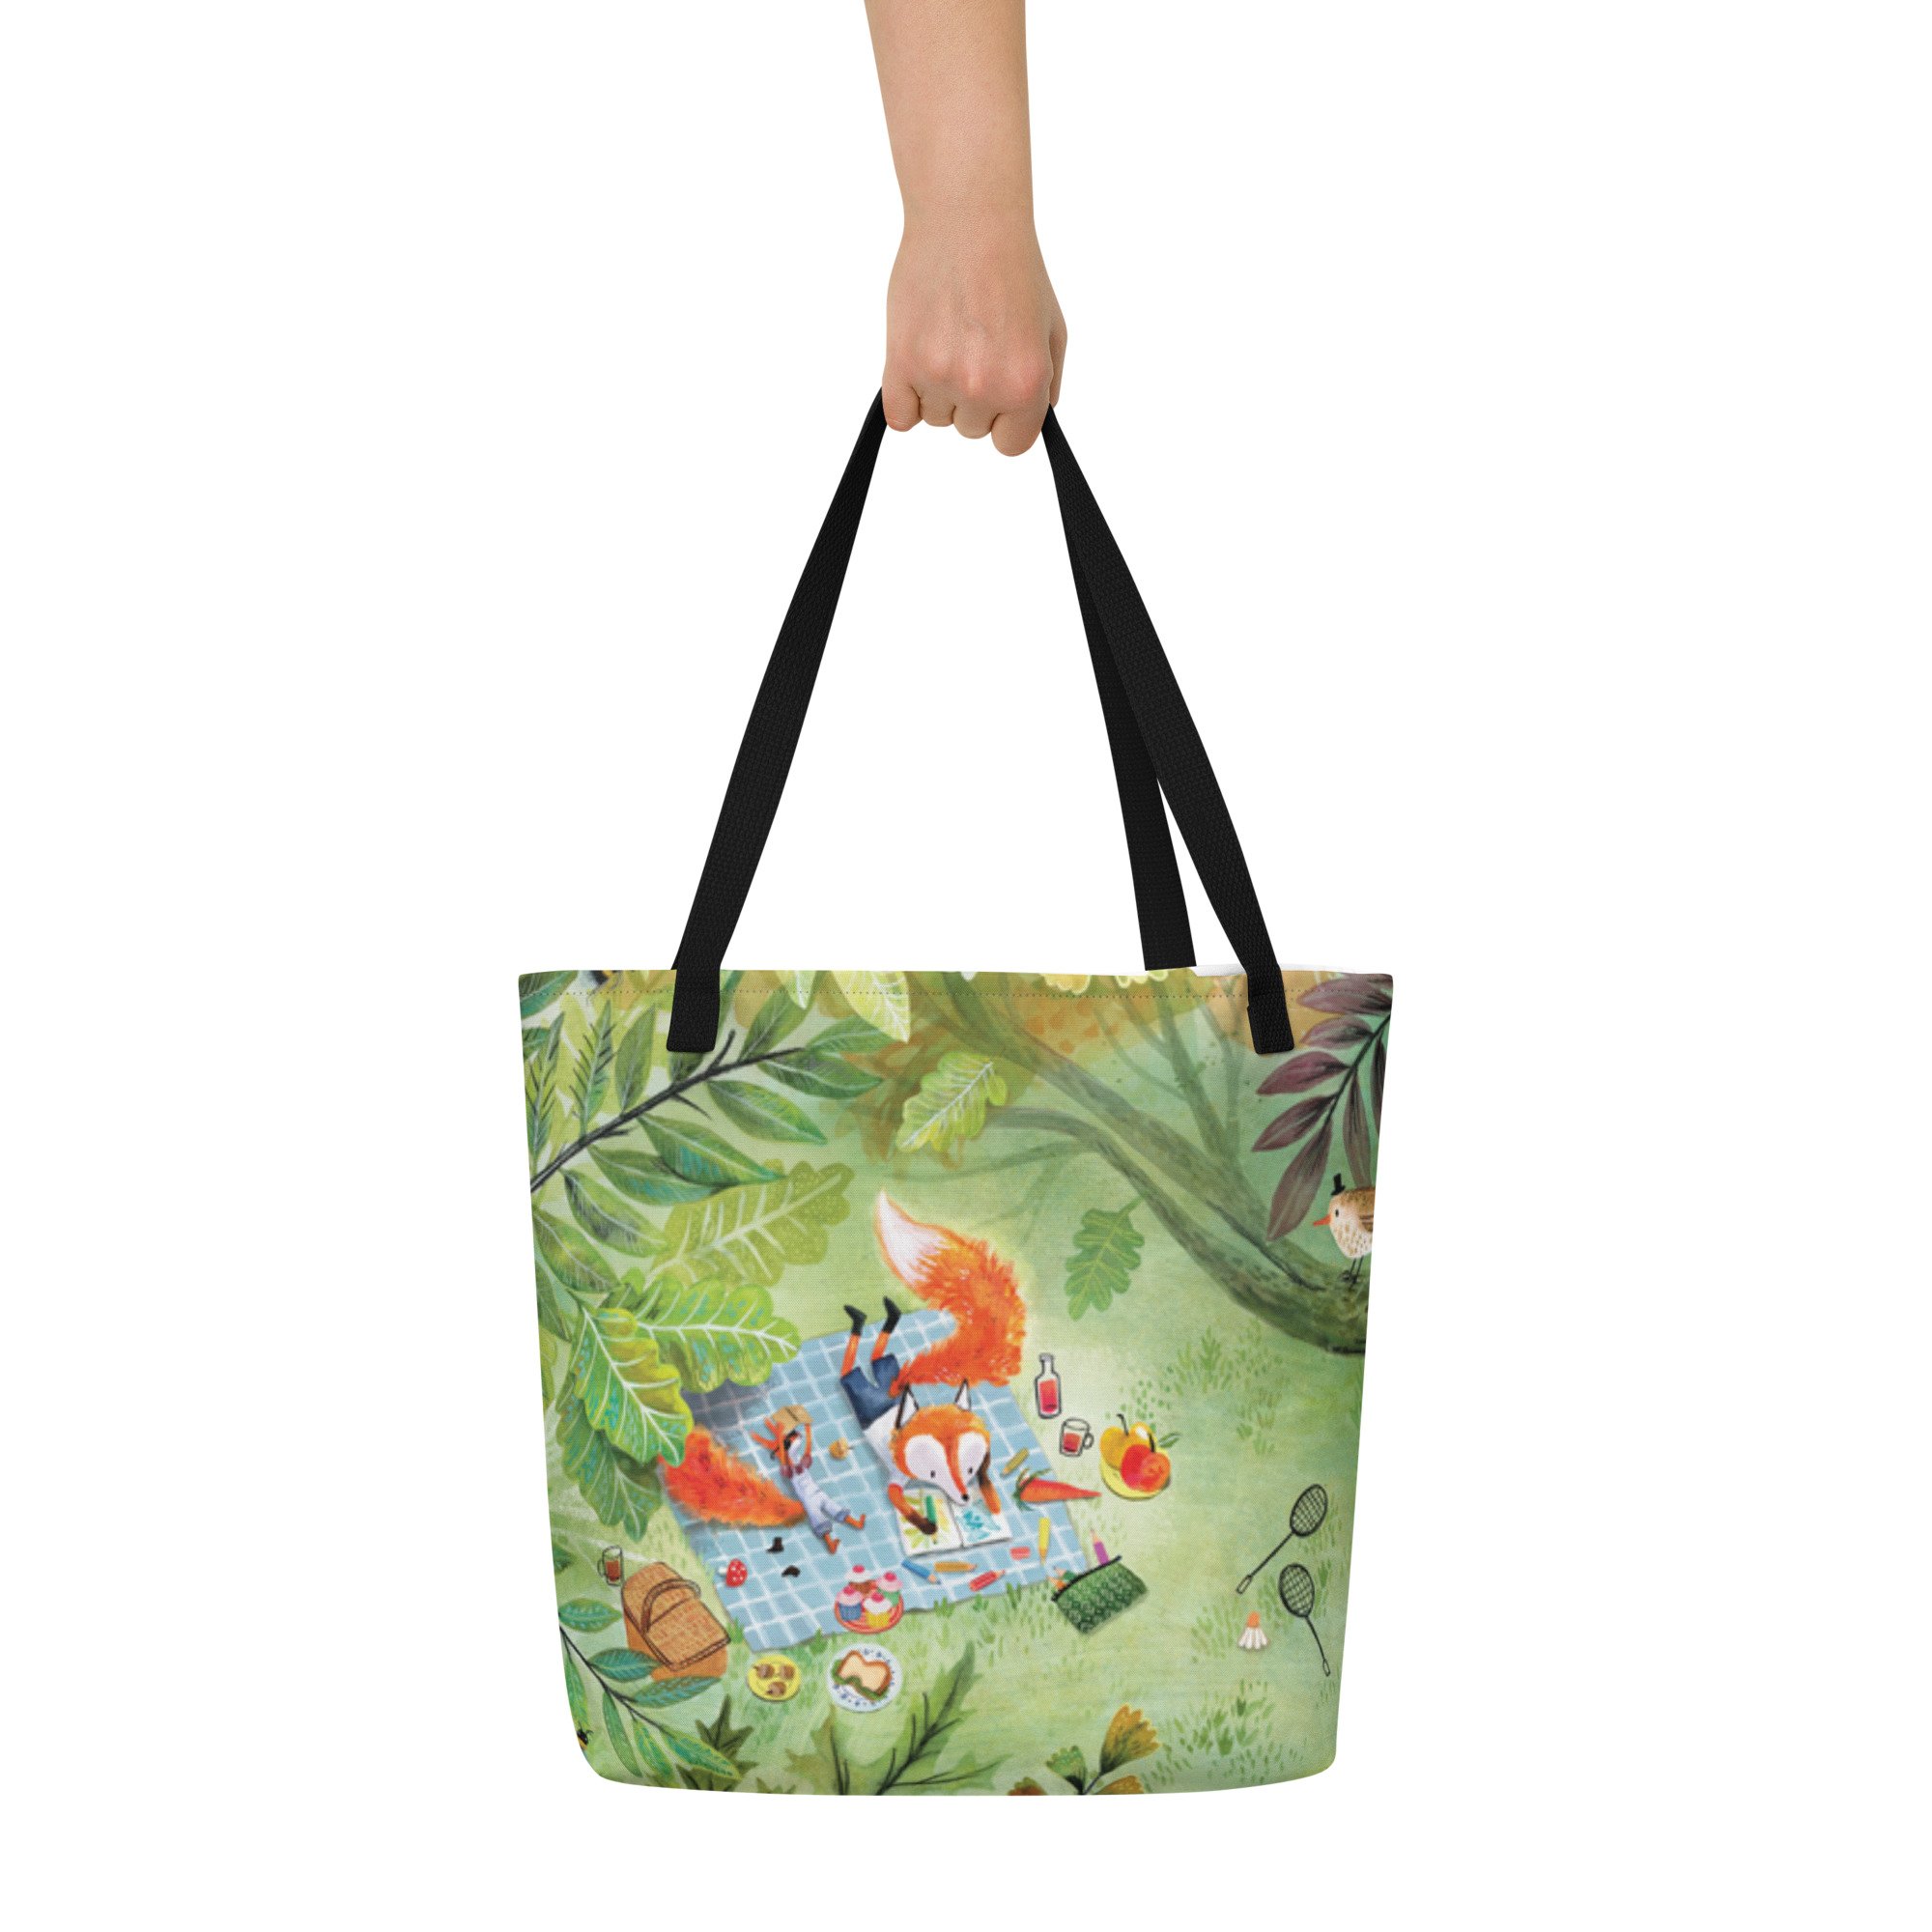 Have you seen the tote-ally cool Tote bags in my webshop? — Miriam Bos -  illustration and surface design